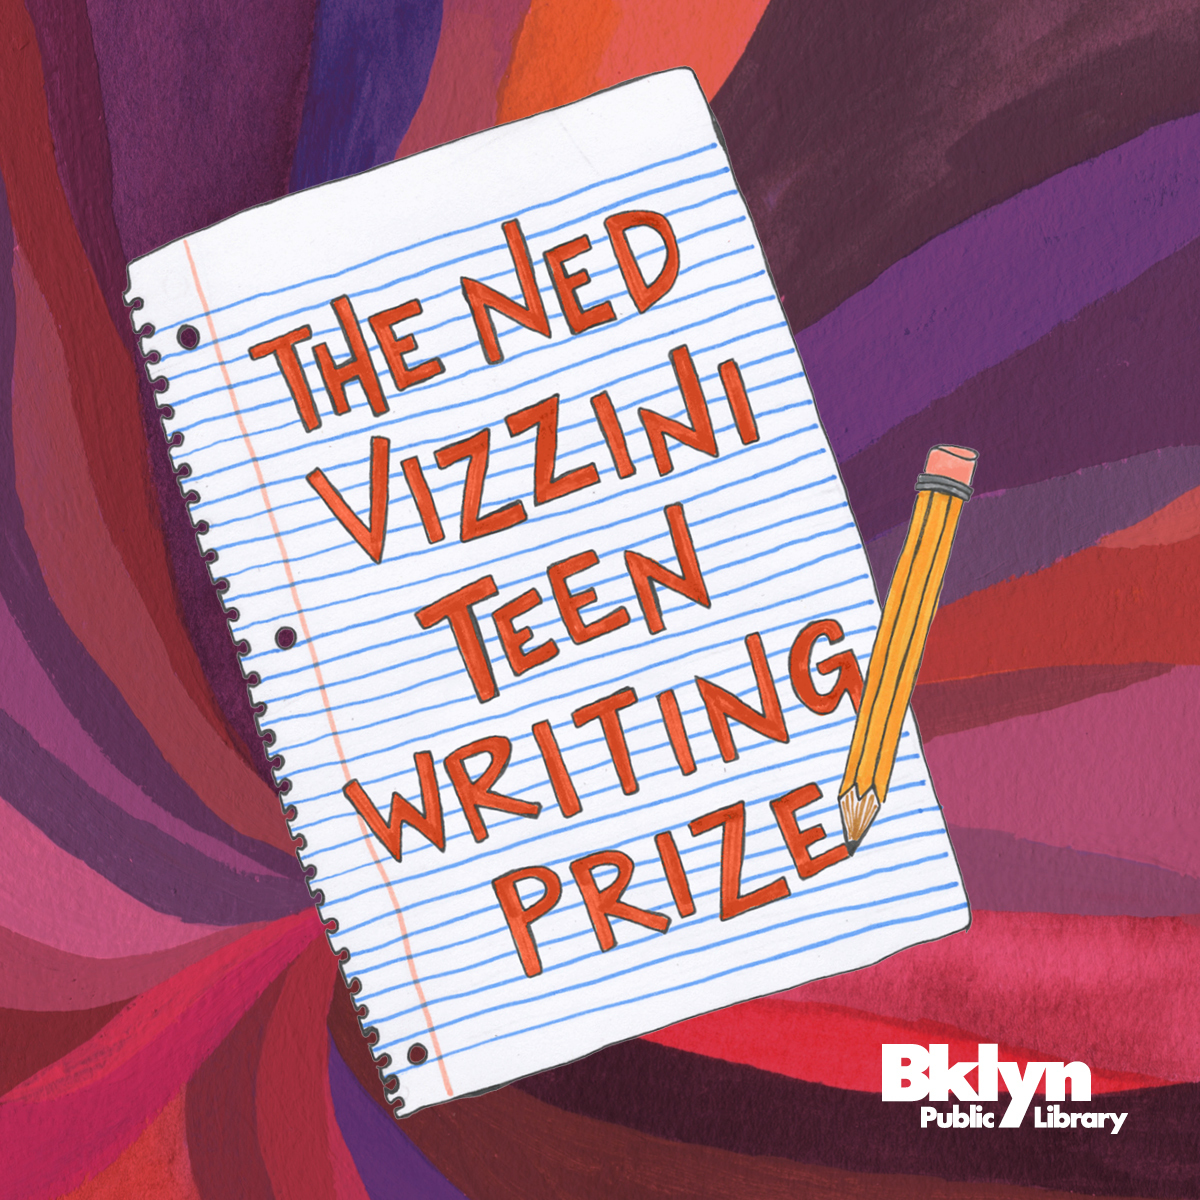 Notebook paper that says The Ned Vizzini Teen Writing Prize with a pencil at the bottom in front of a swirly background